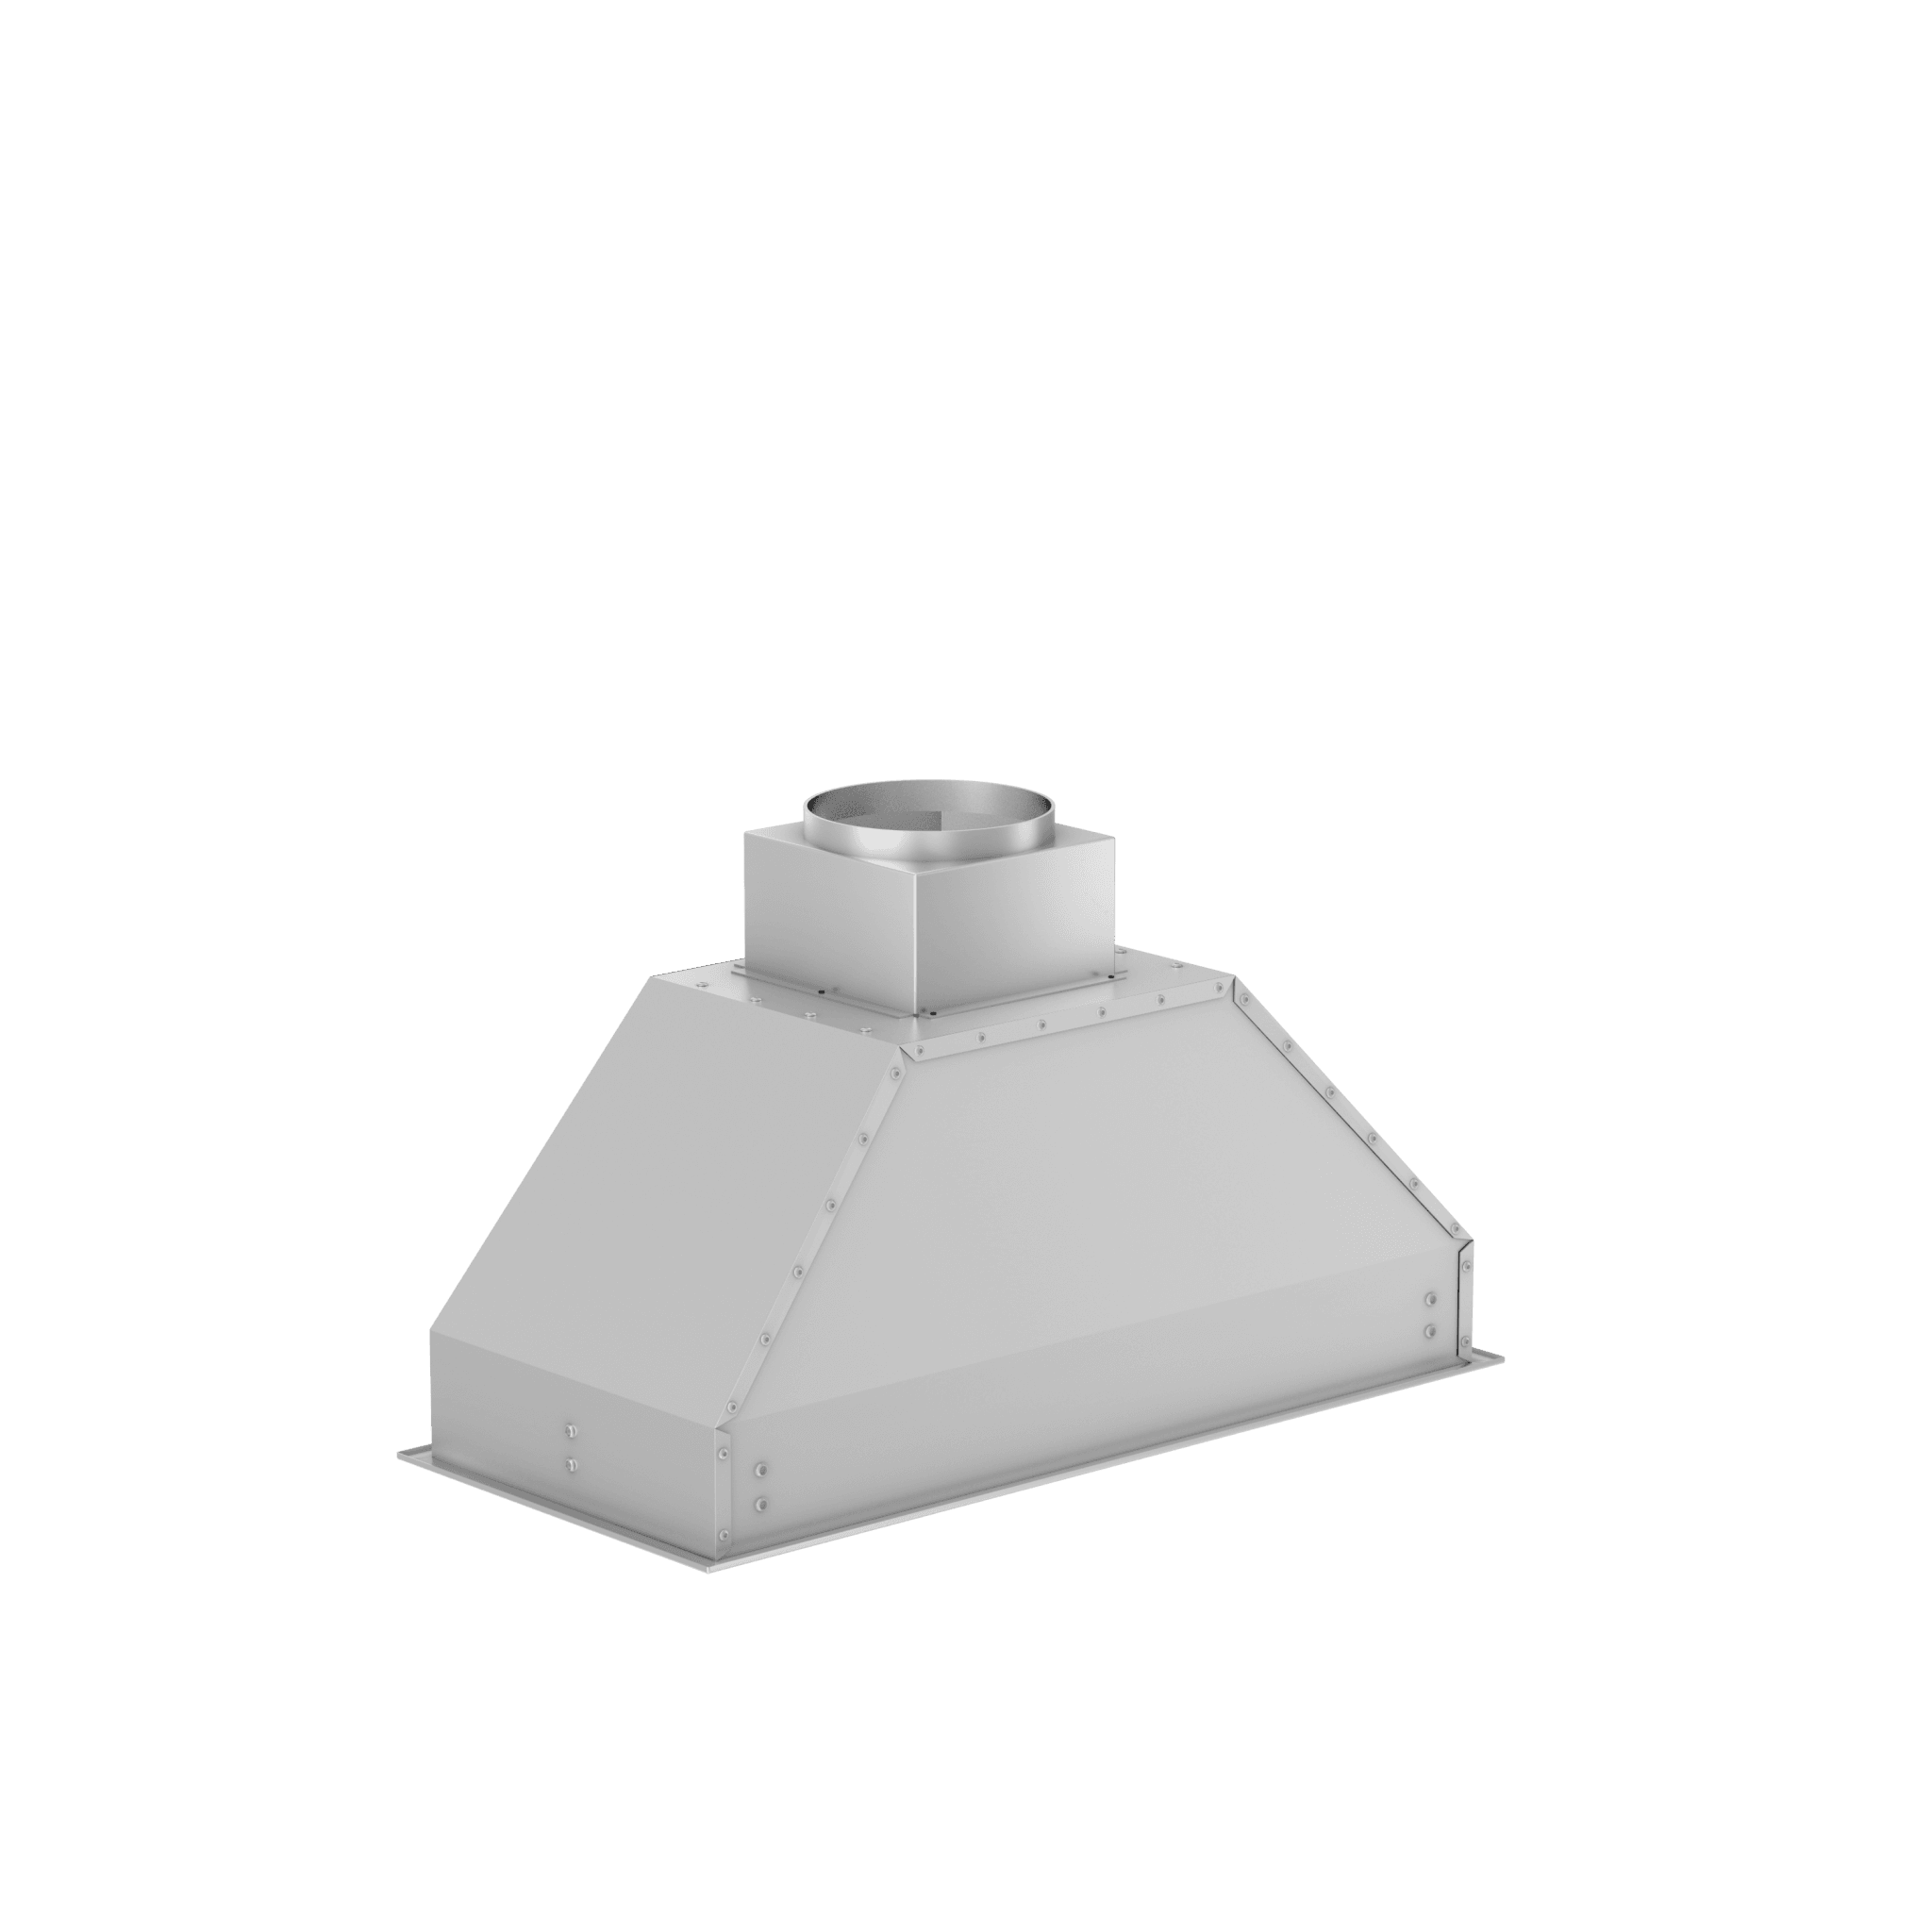 ZLINE Ducted Wall Mount Range Hood Insert in Outdoor Approved Stainless Steel - 695-304